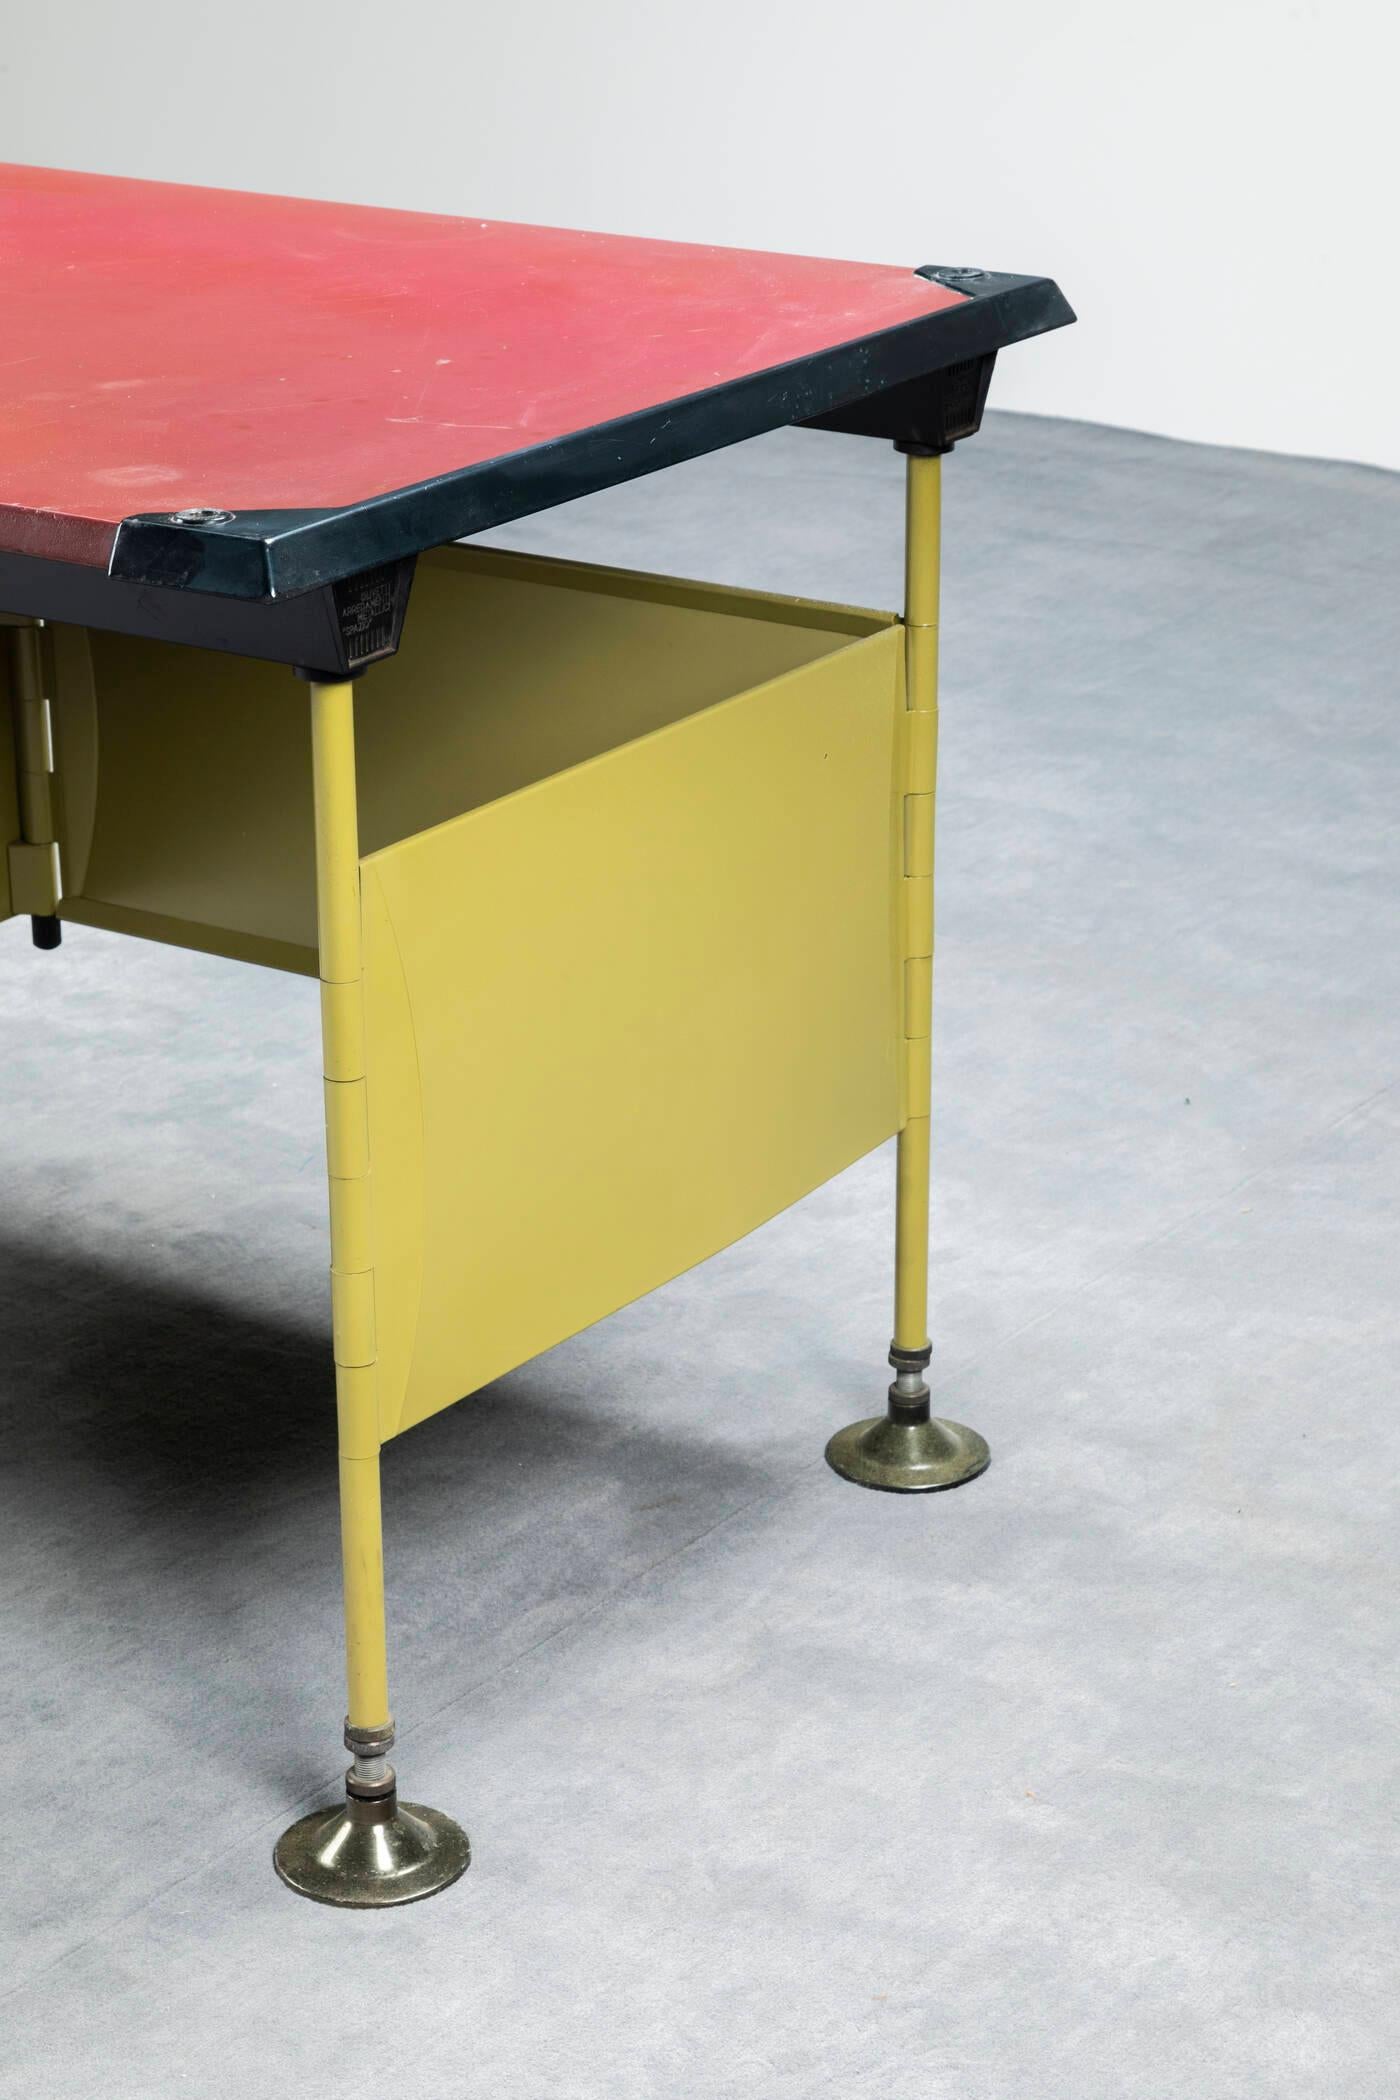 Mid-Century Metal and Leatherette Desk, Spazio Series, BBPR for Olivetti, Italy In Fair Condition For Sale In Montecatini Terme, Toscana